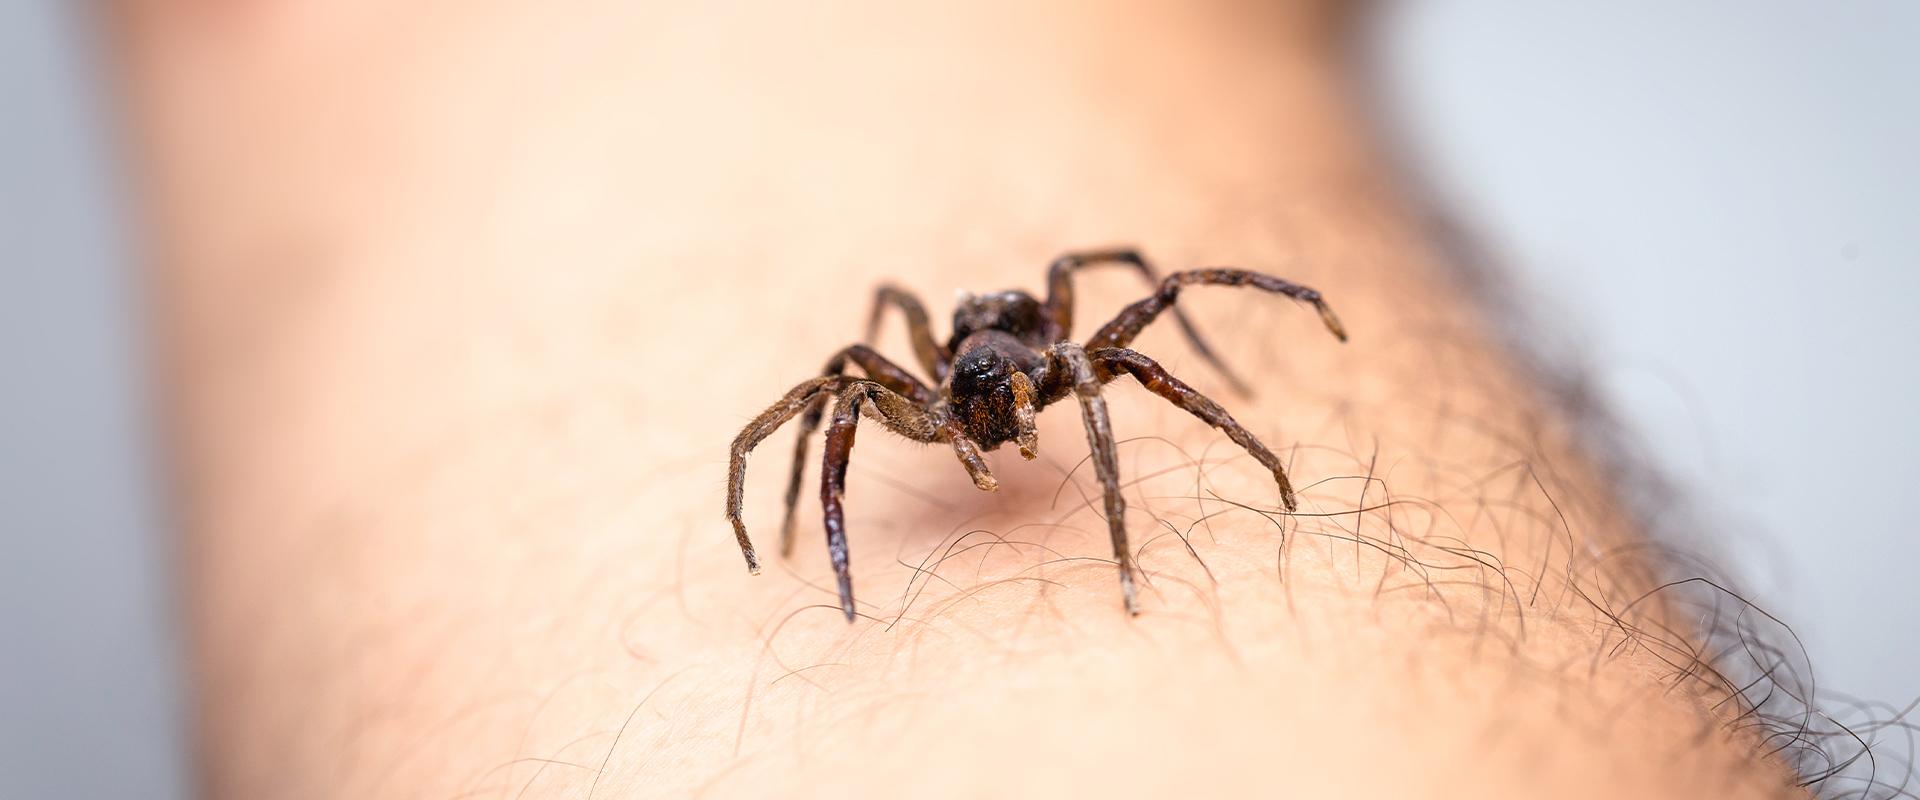 a spider crawling on a persons arm